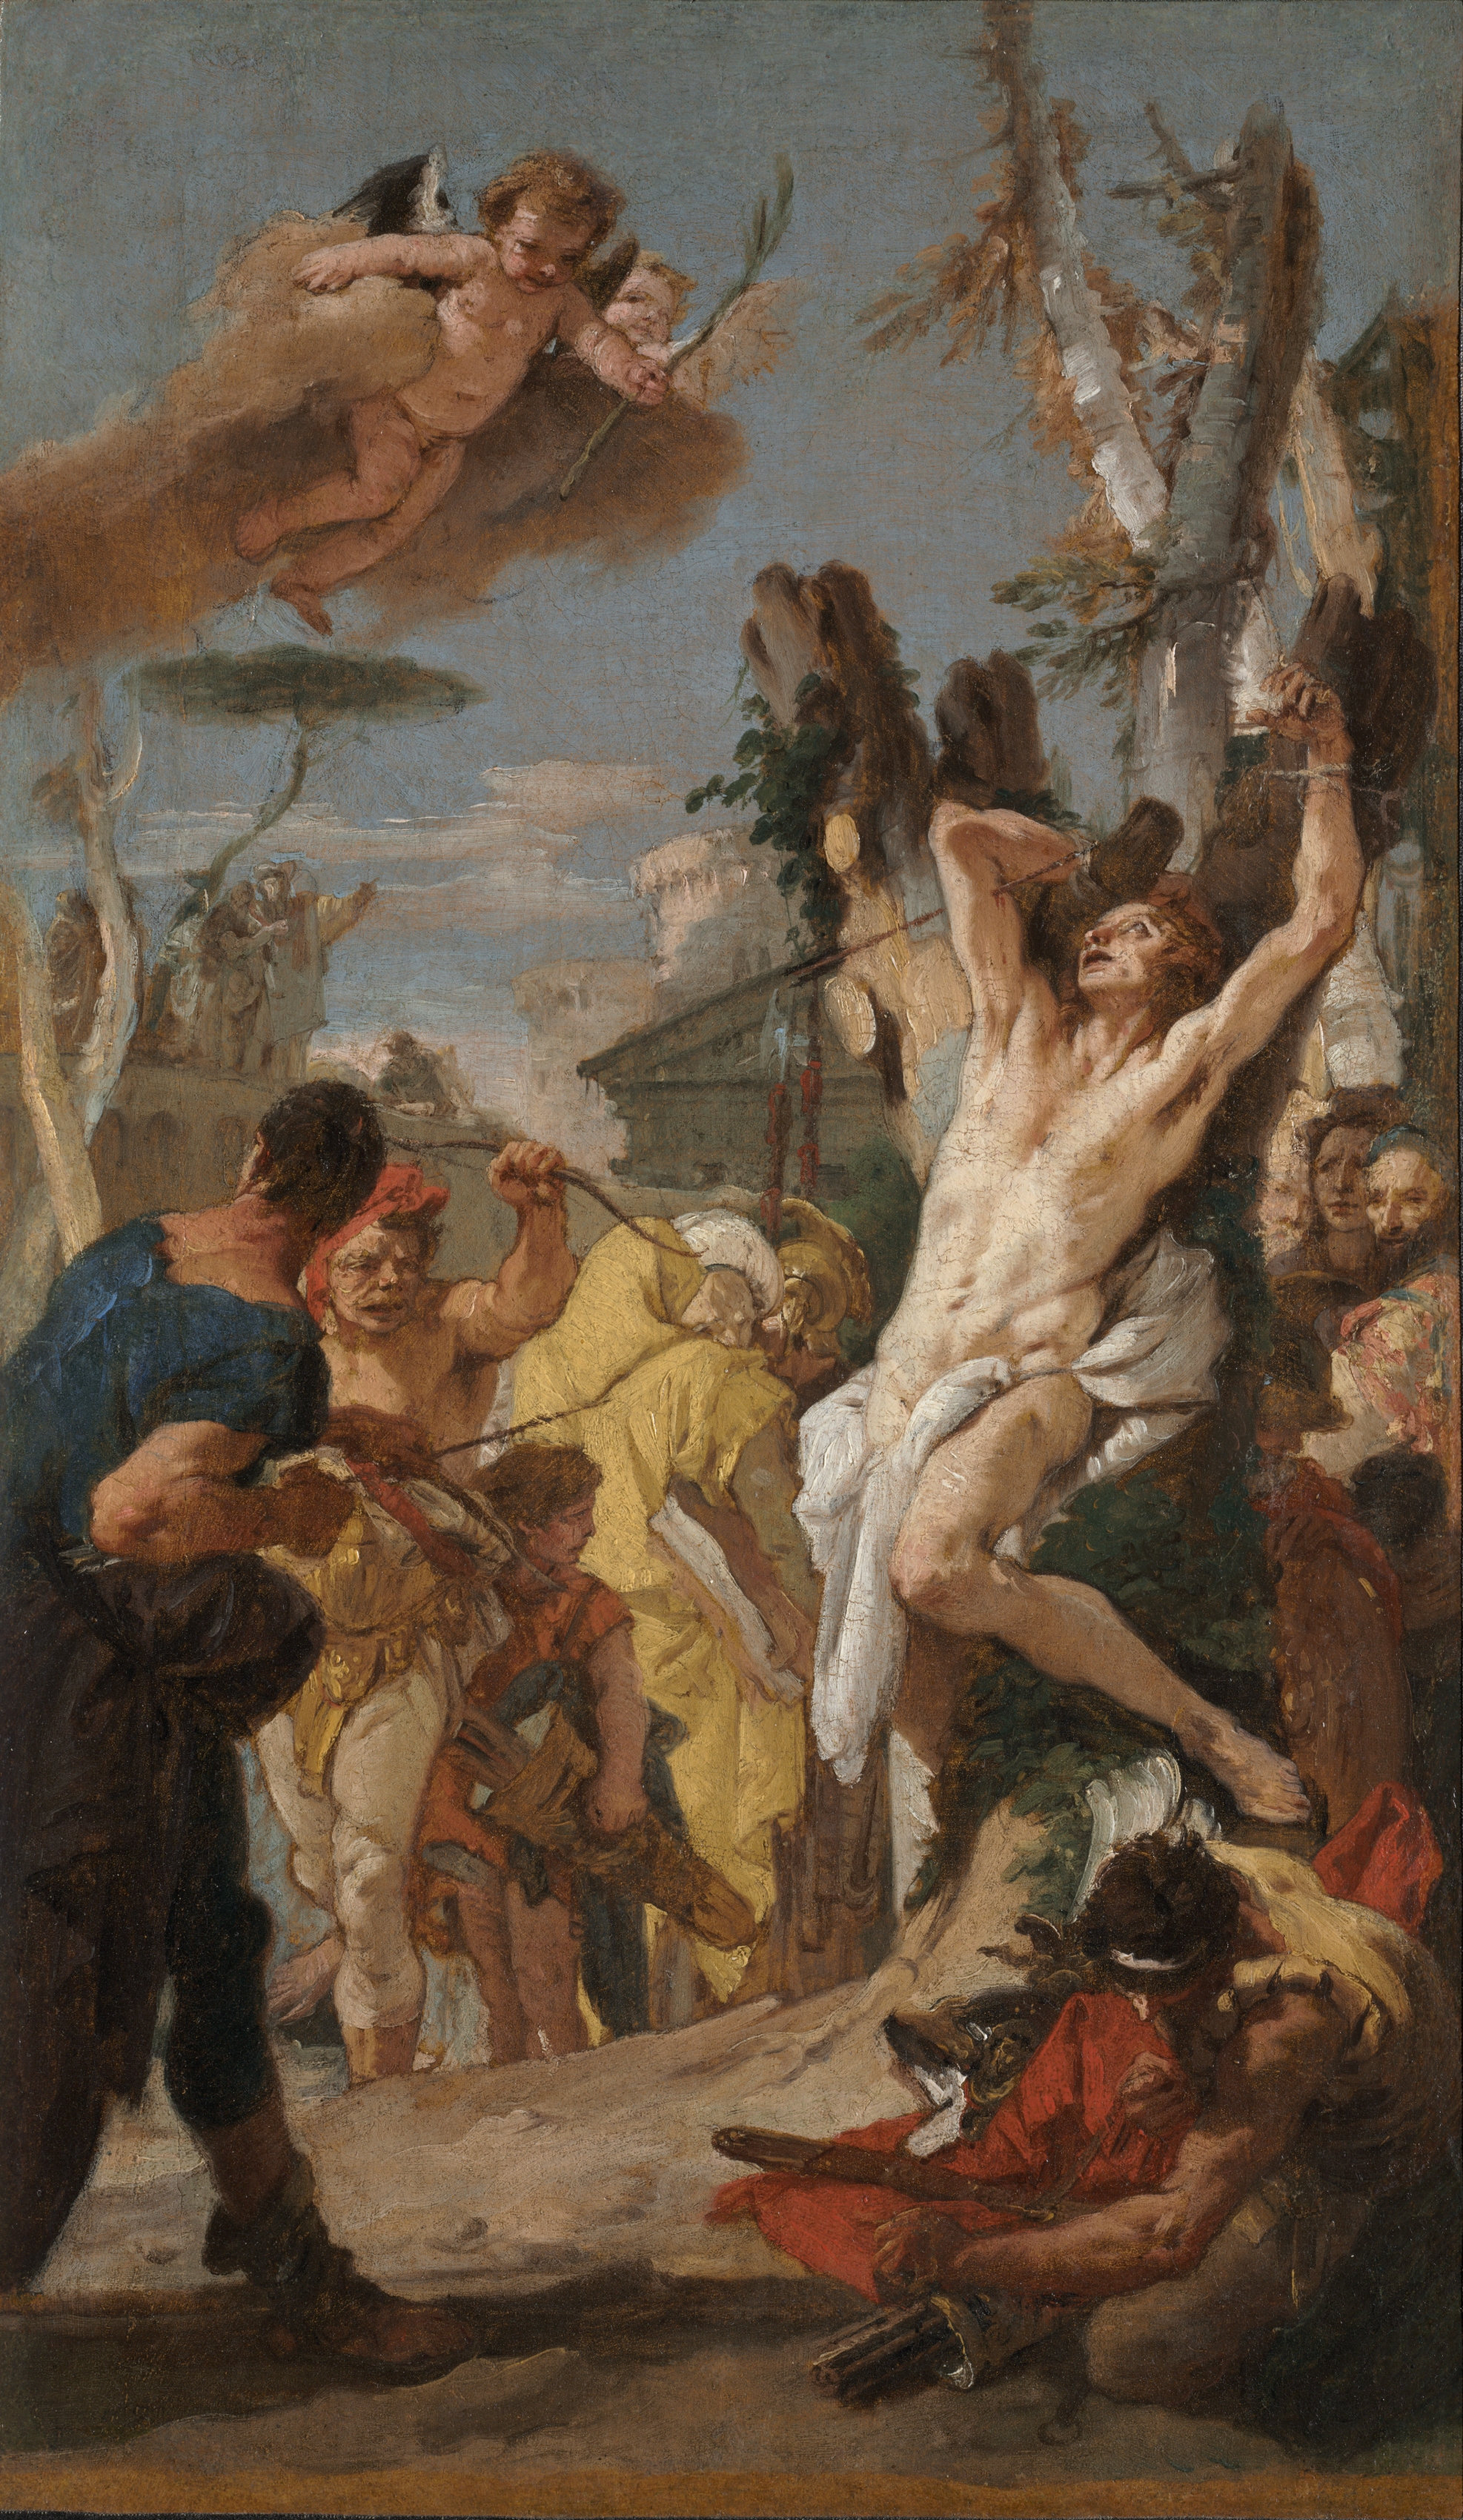 Study for "The Martyrdom of Saint Sebastian" (for the Augustinian monastery at Diessen, Germany)